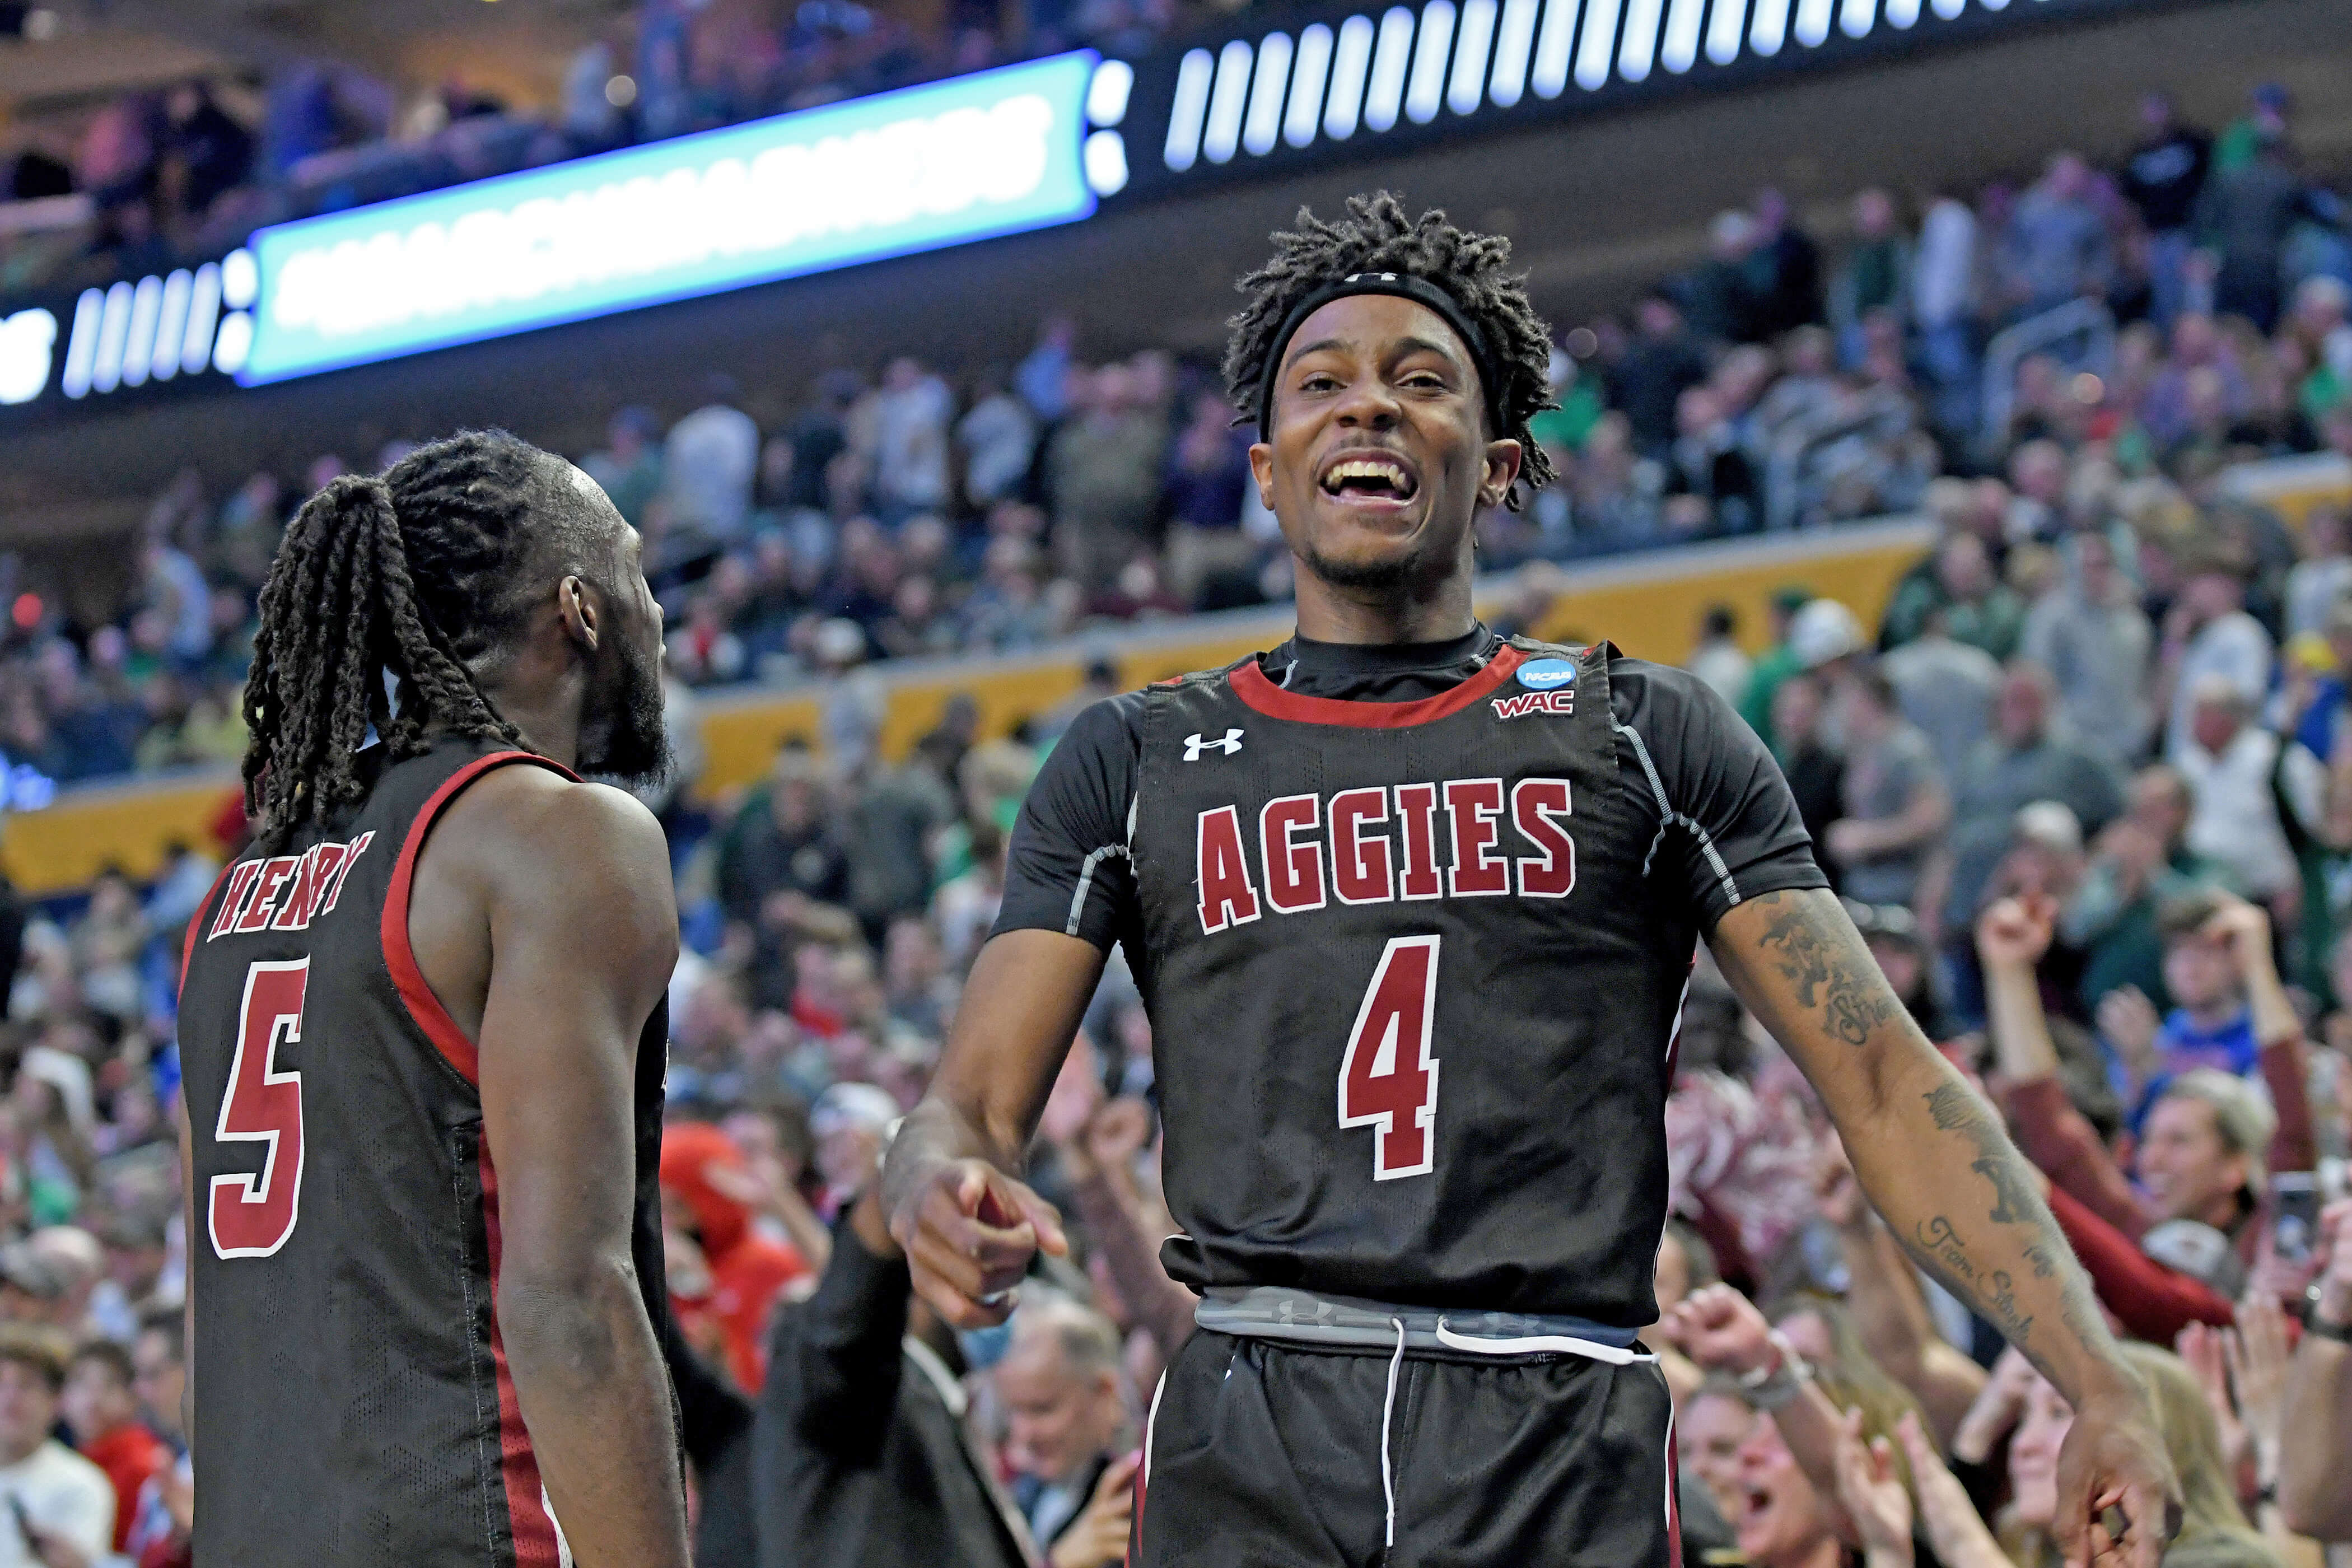 New Mexico State vs Arkansas West Region Picks: Aggies Have Momentum on Their Side